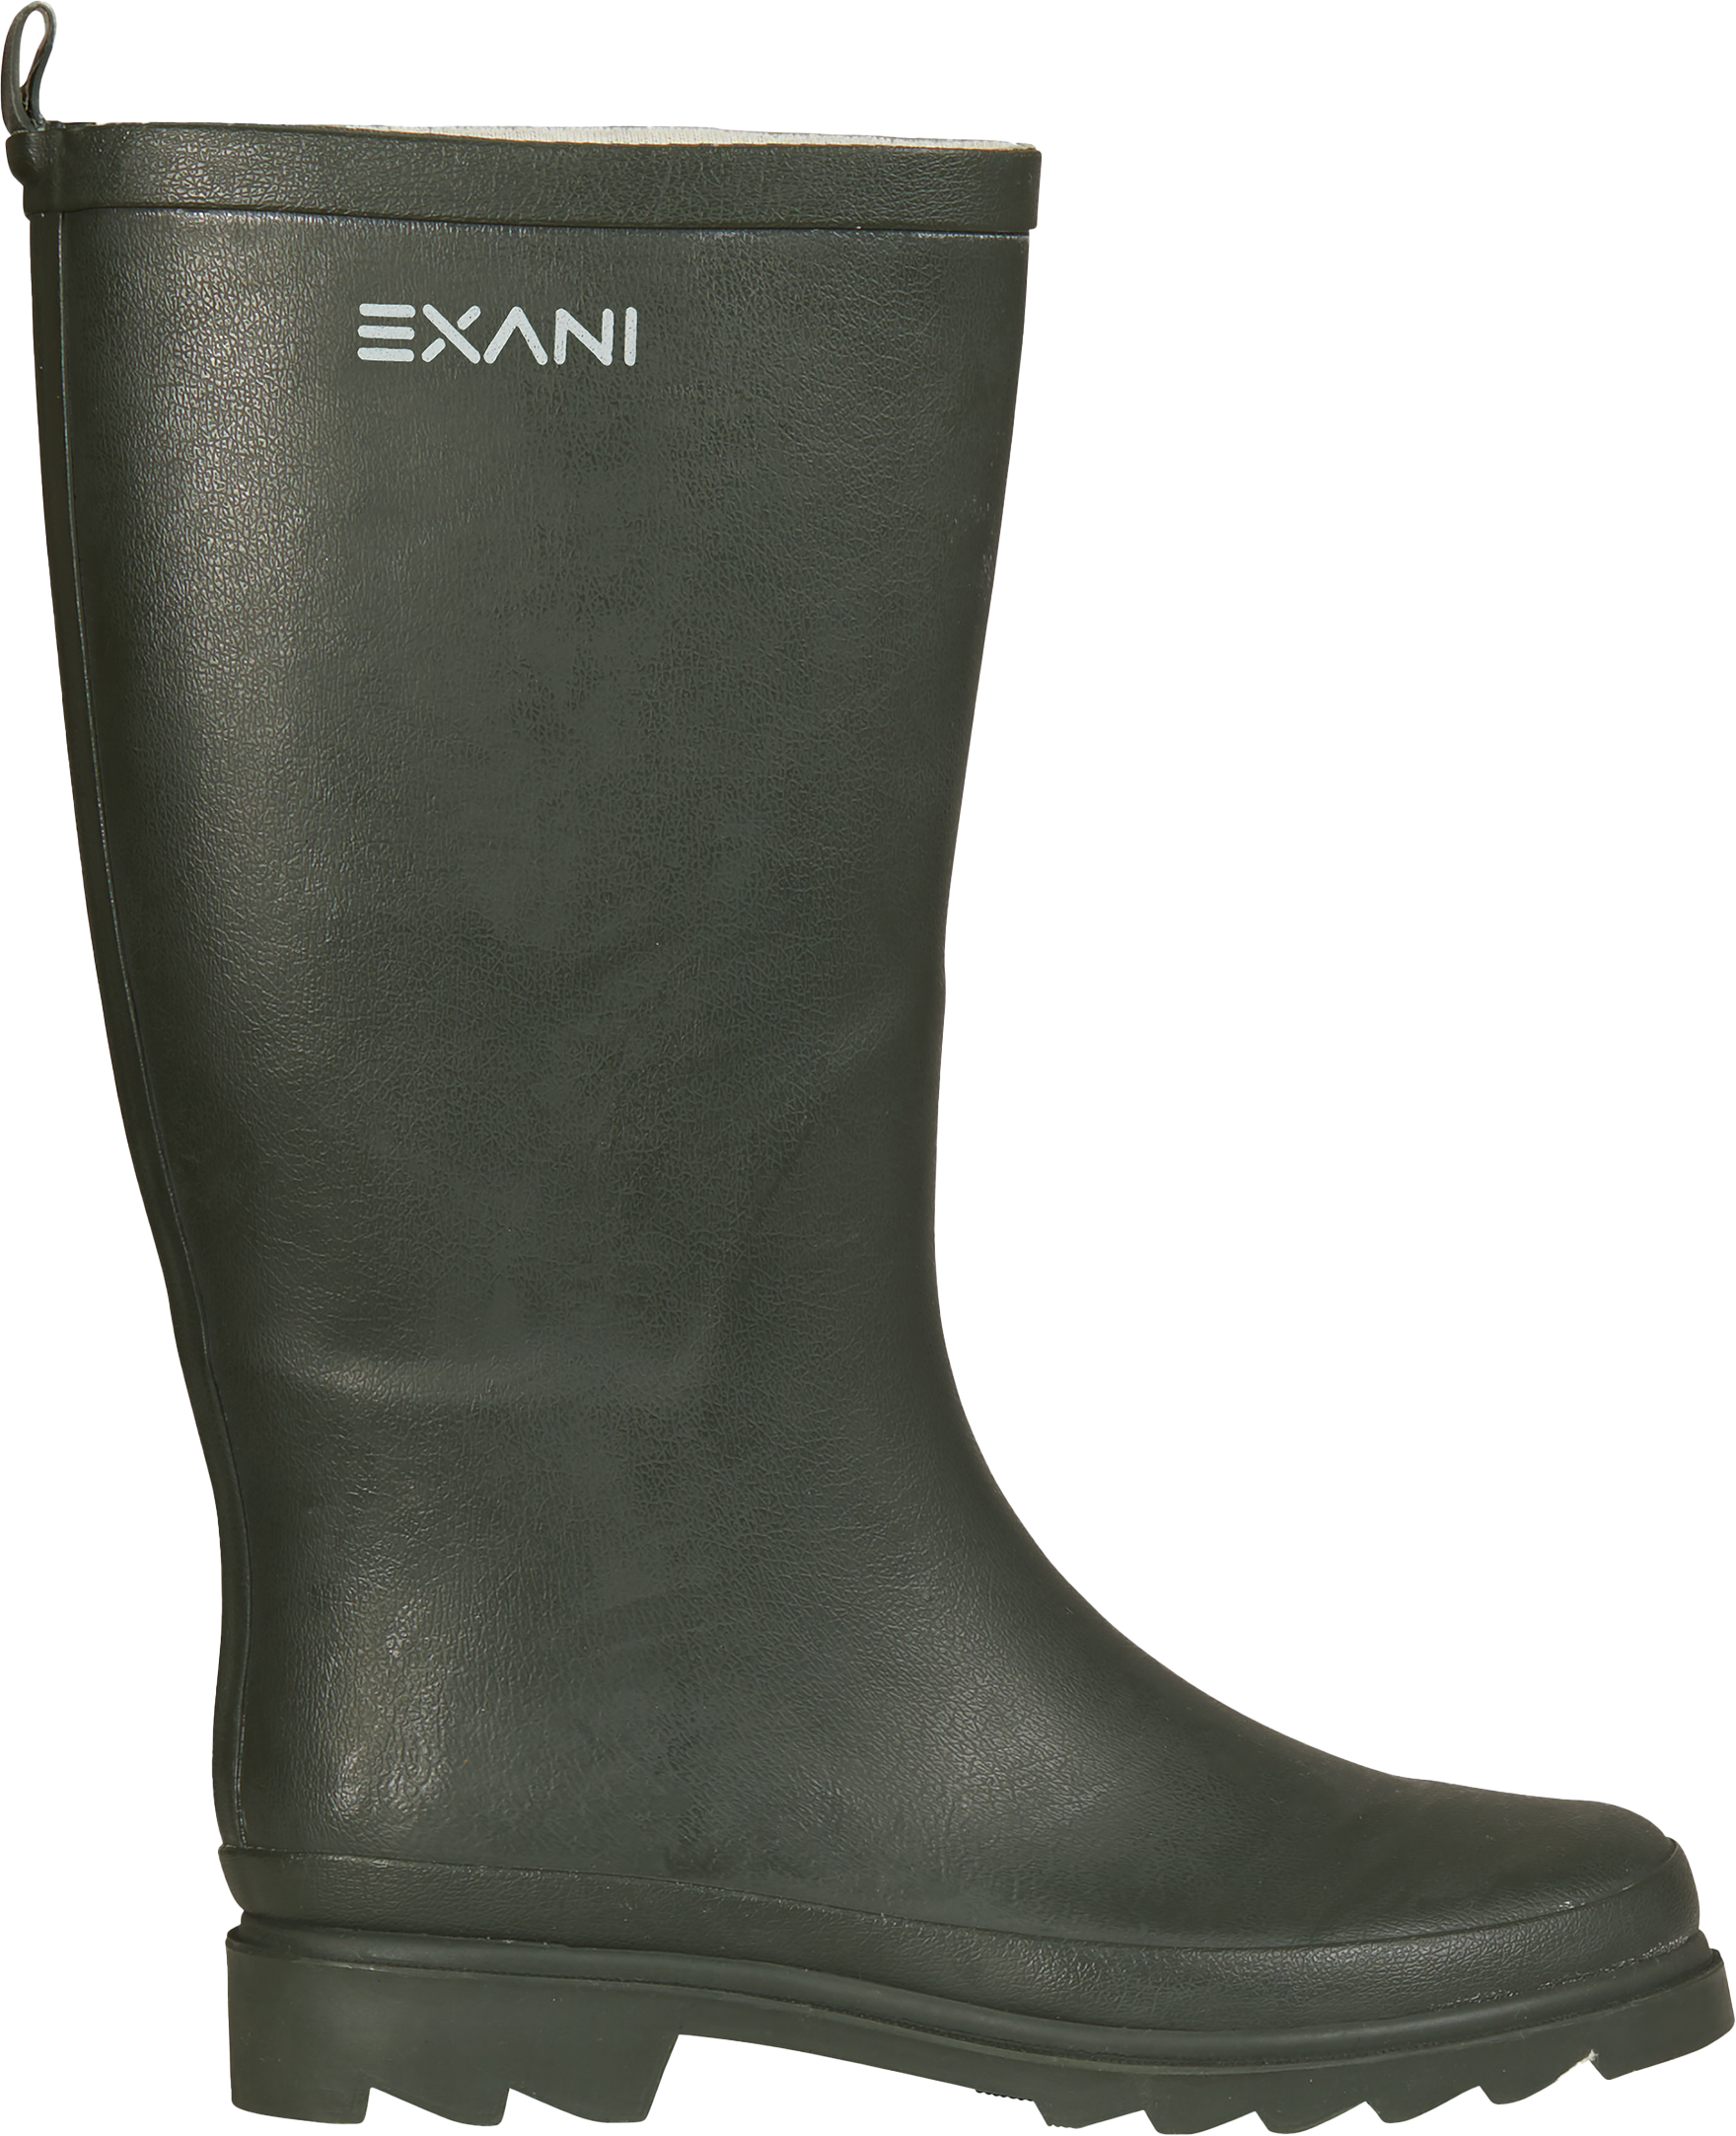 Exani Men’s Forest Green